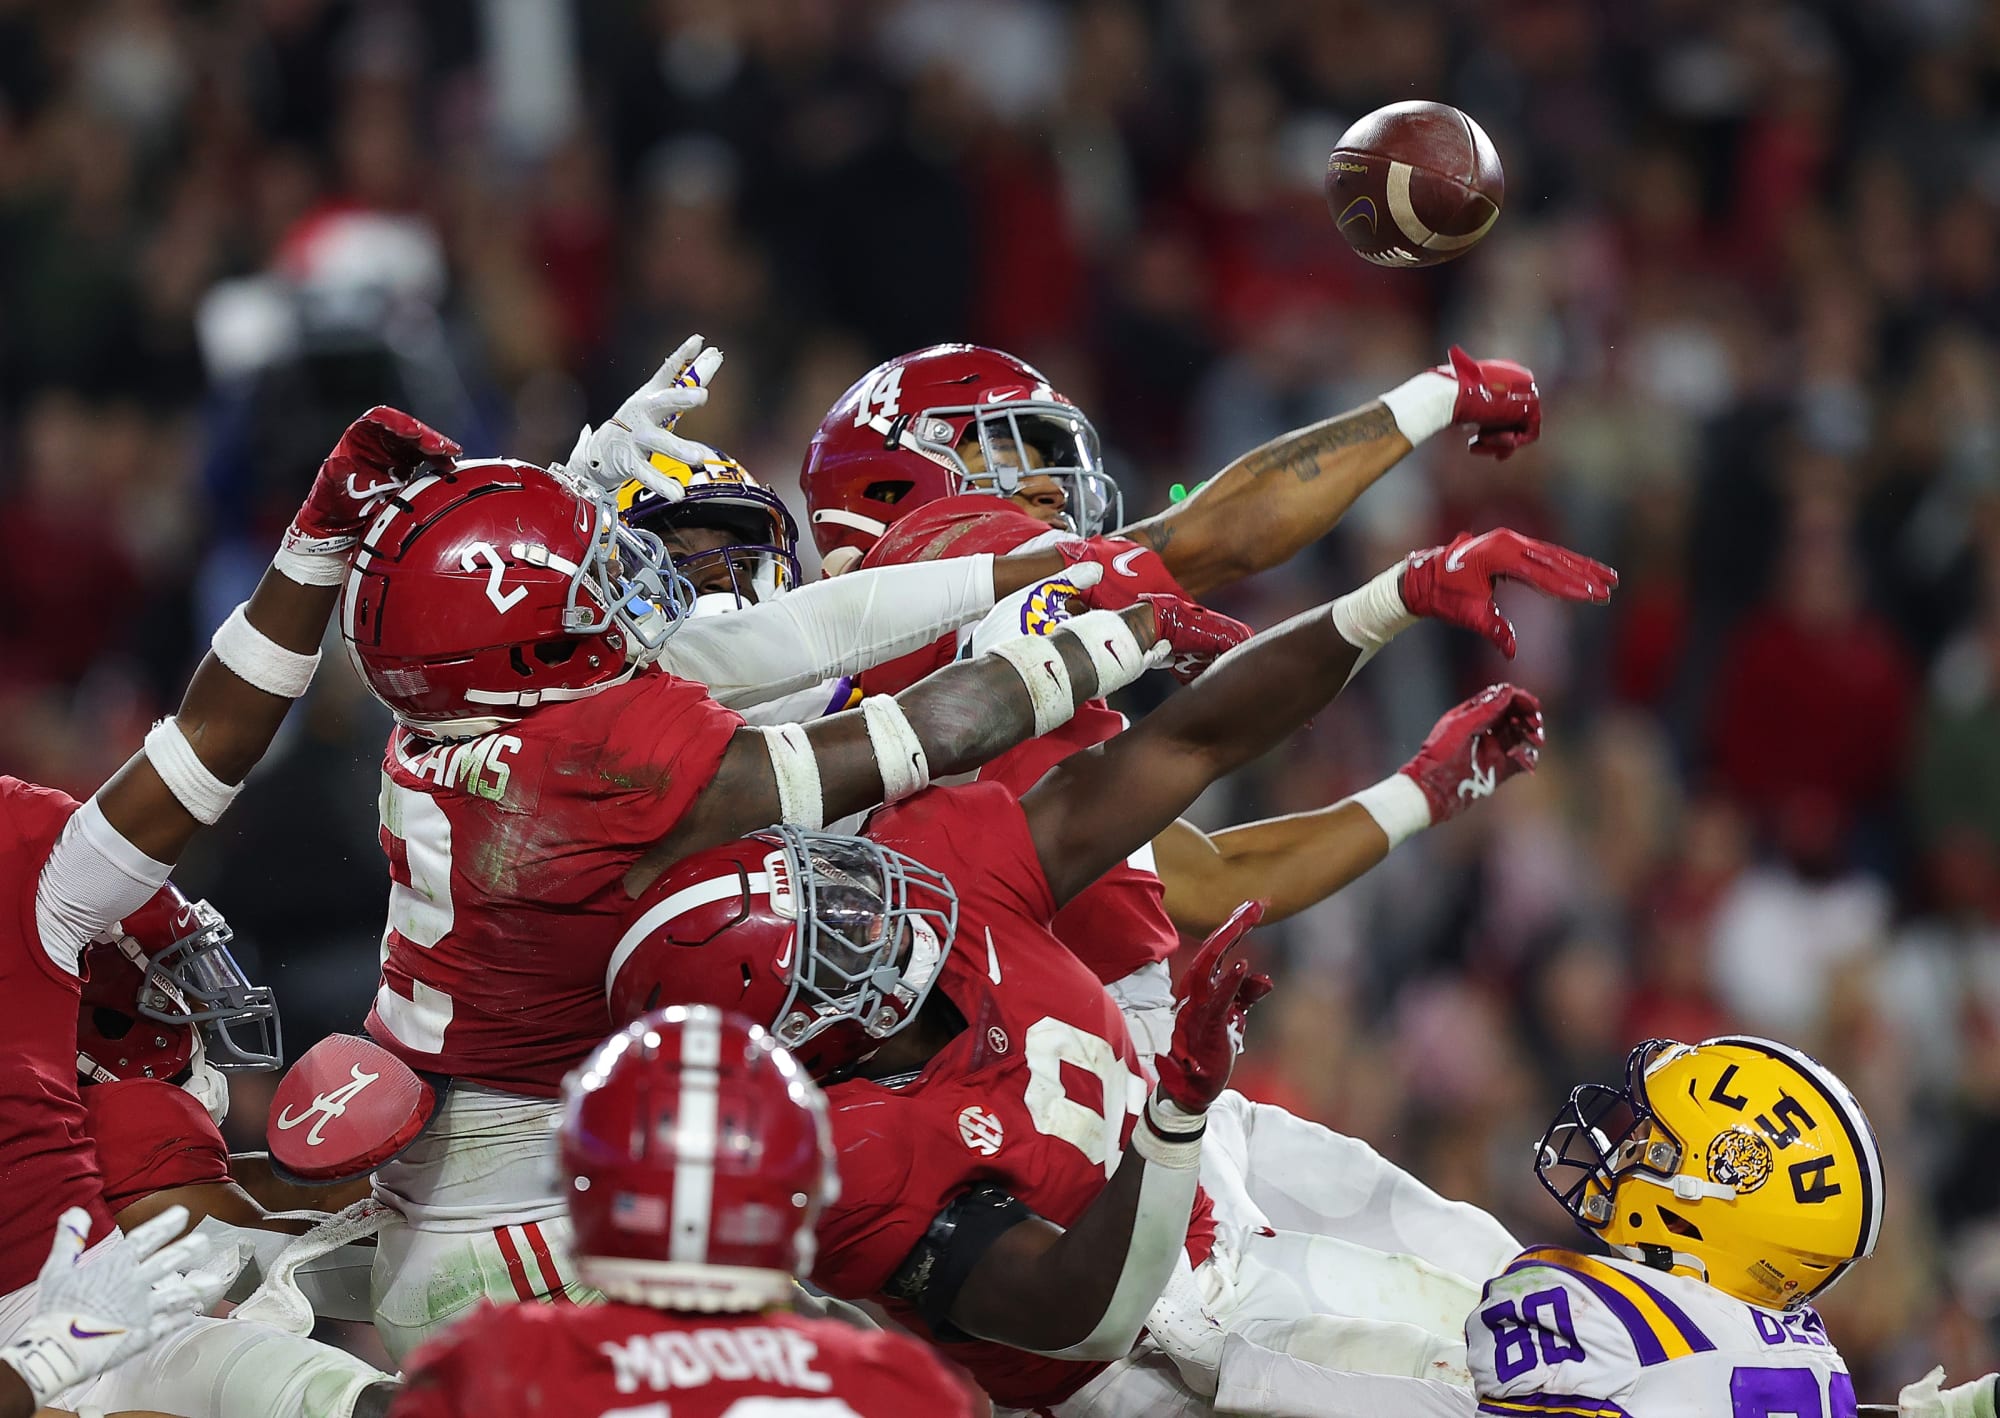 Ranking The Sec Football Bowl Games From Best To Worst